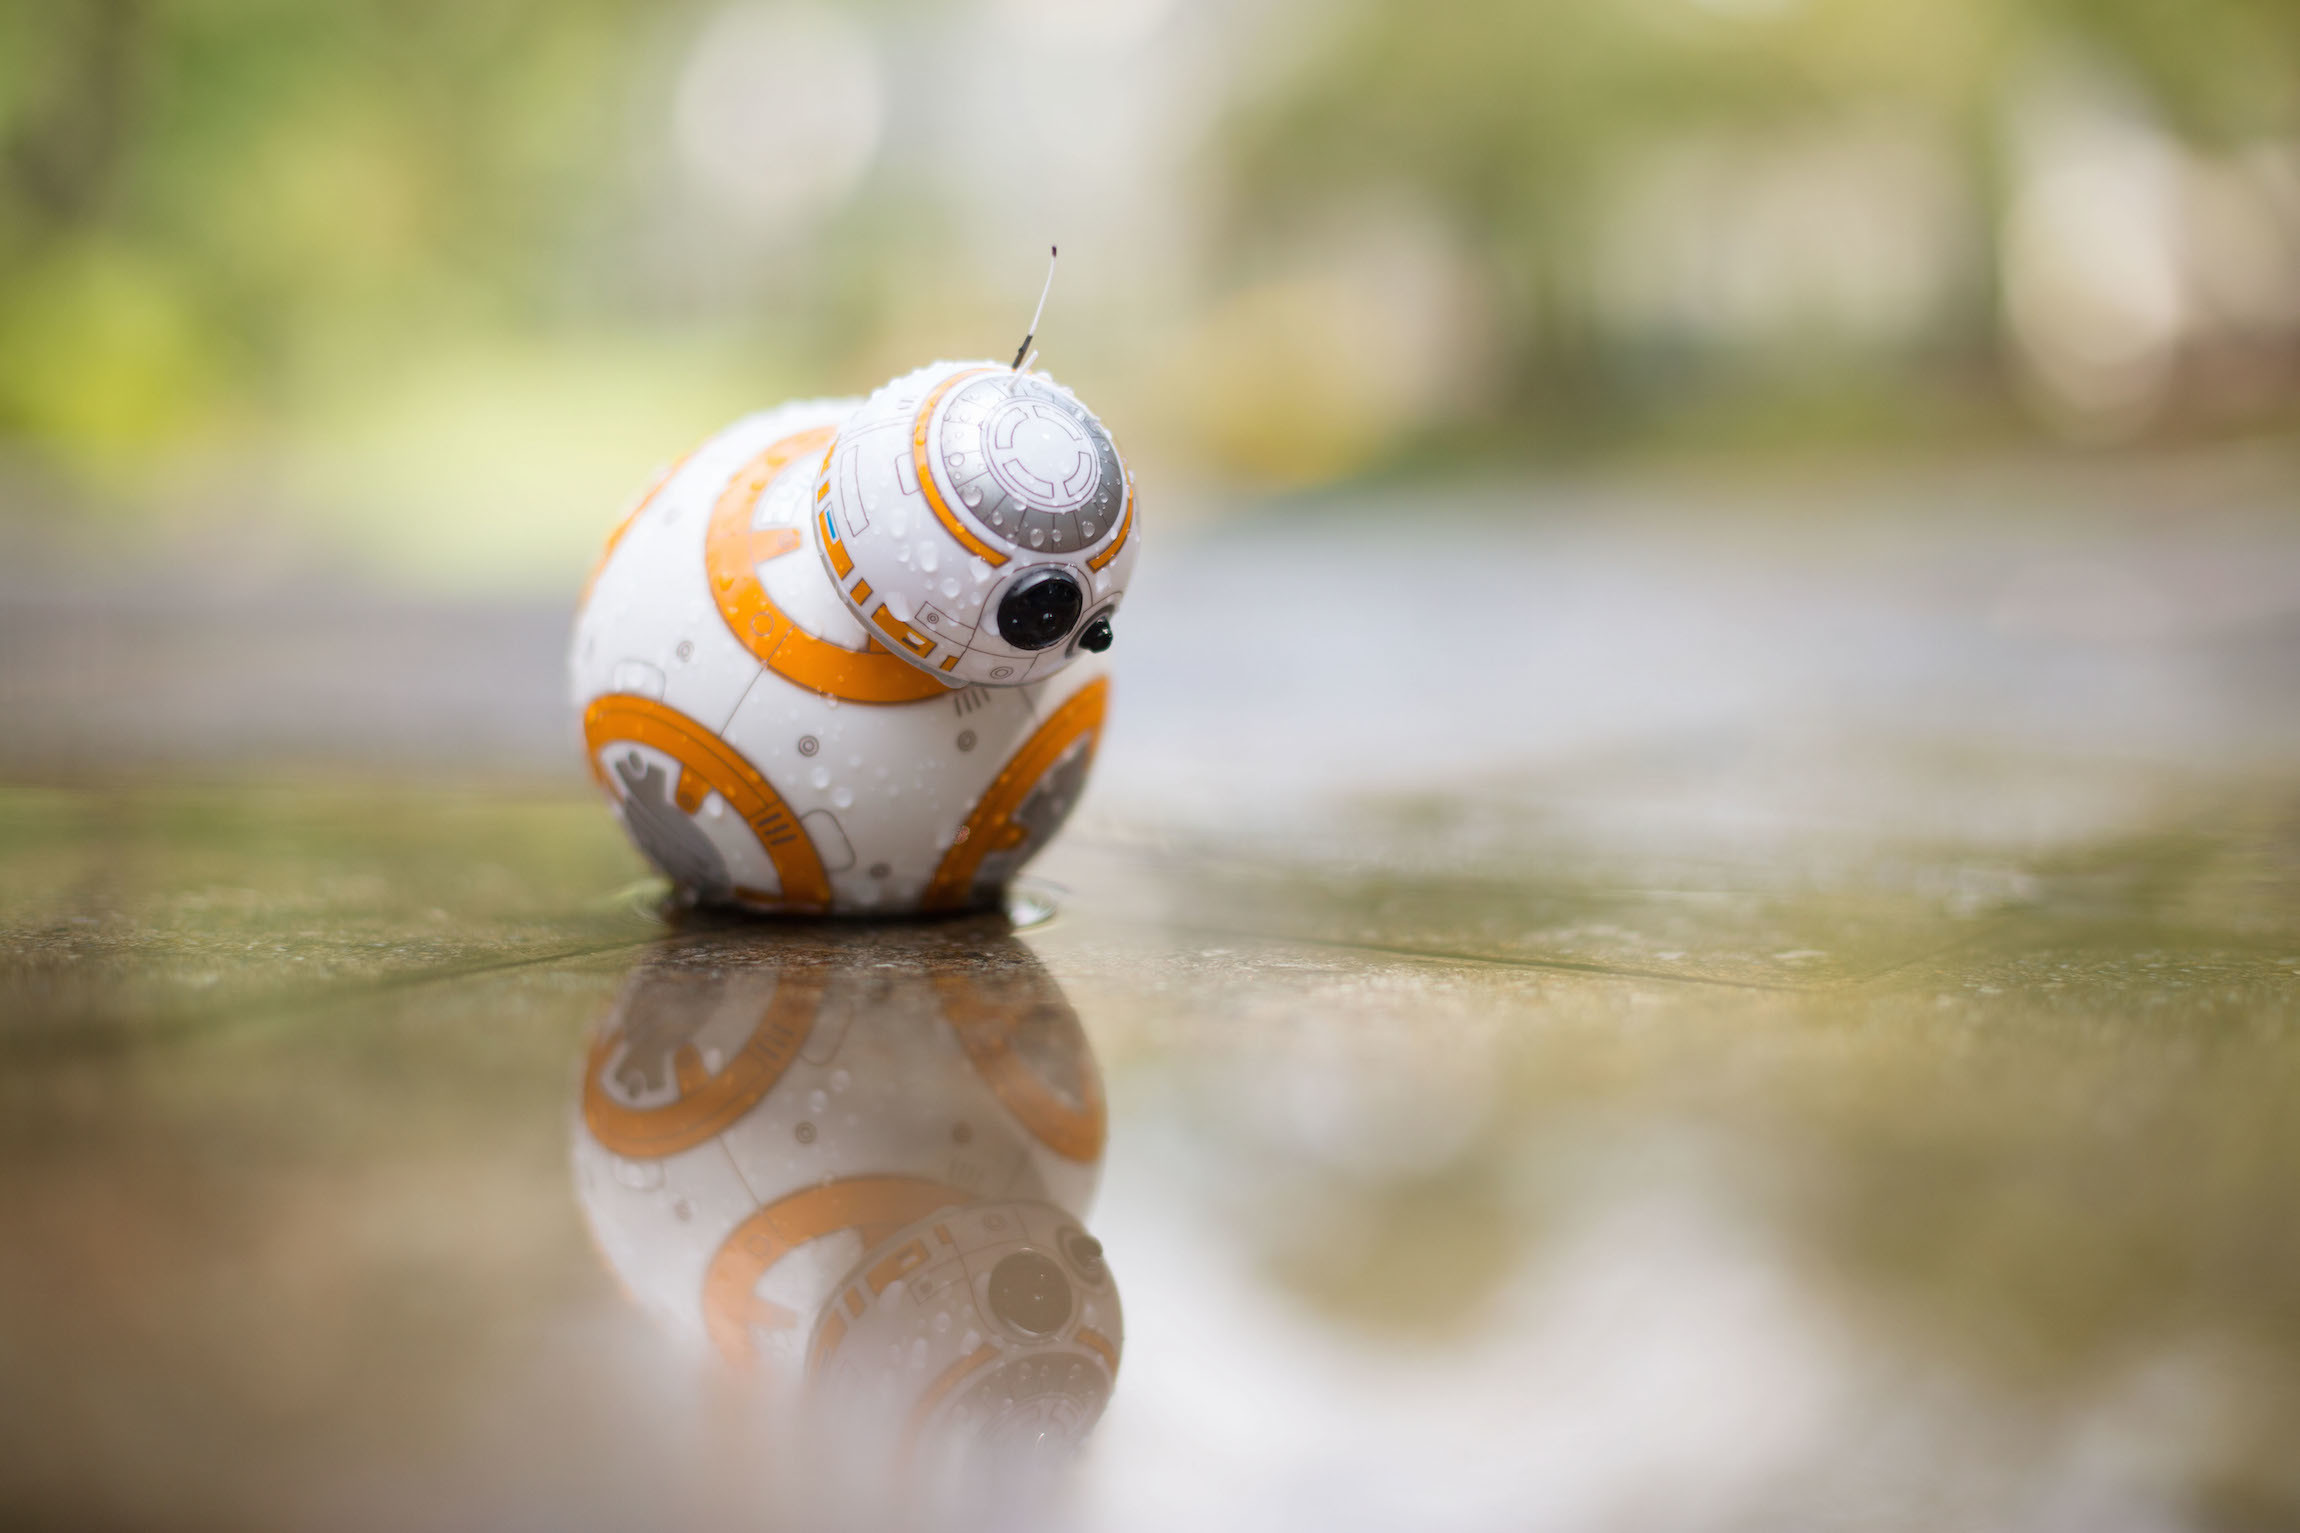 2300x1533 Explore Bb8 Star Wars, Star Wars Gifts, and more!